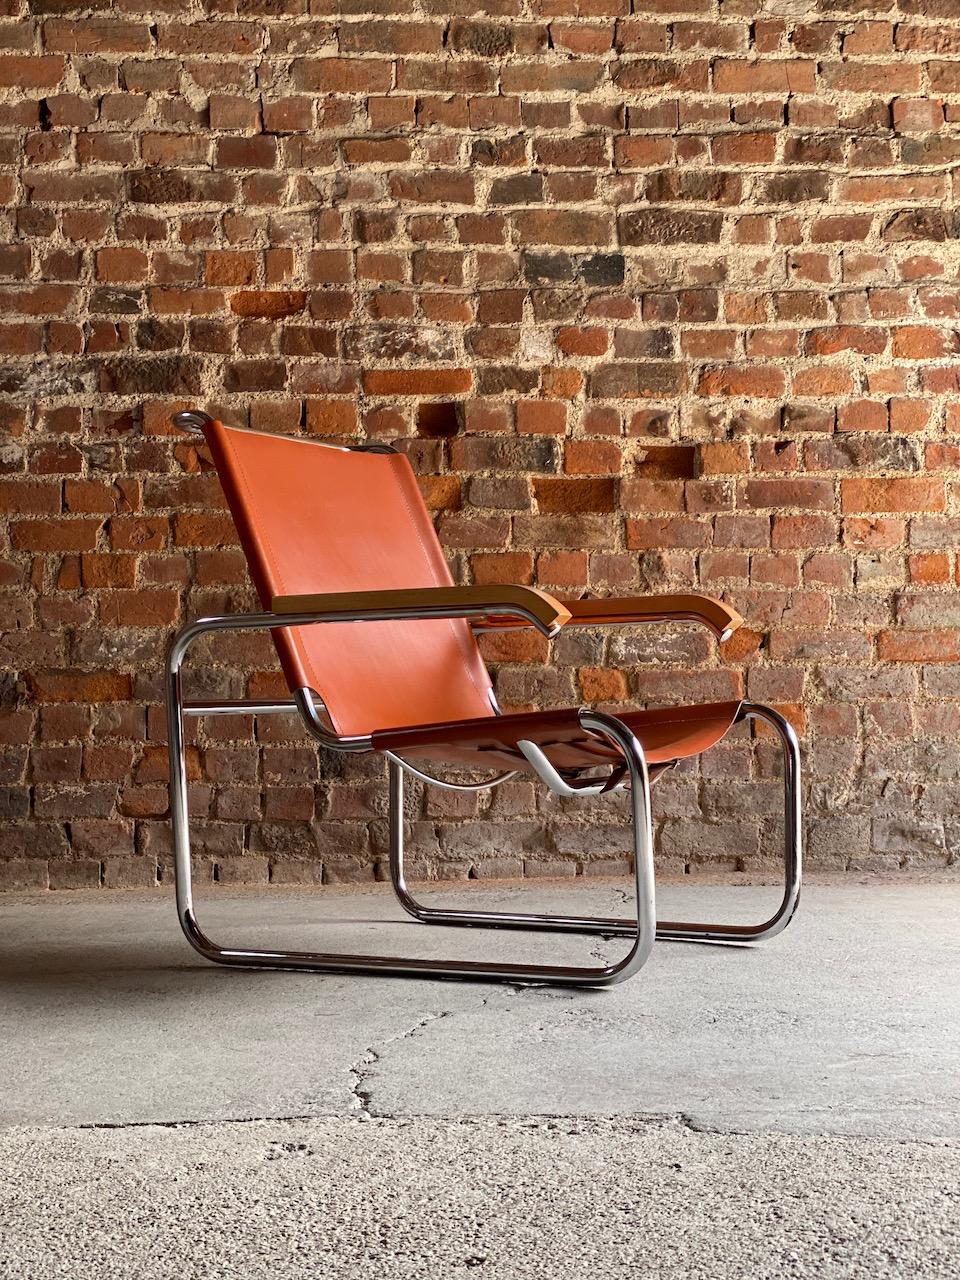 
Marcel Breuer B35 lounge chair by Thonet, circa 1930s 

Stunning Bauhaus design Marcel Breuer B35 armchair by Thonet circa 1930s, the cantilever frame with original tan leather seat, wooden armrests with a chromed tubular steel frame, a classic